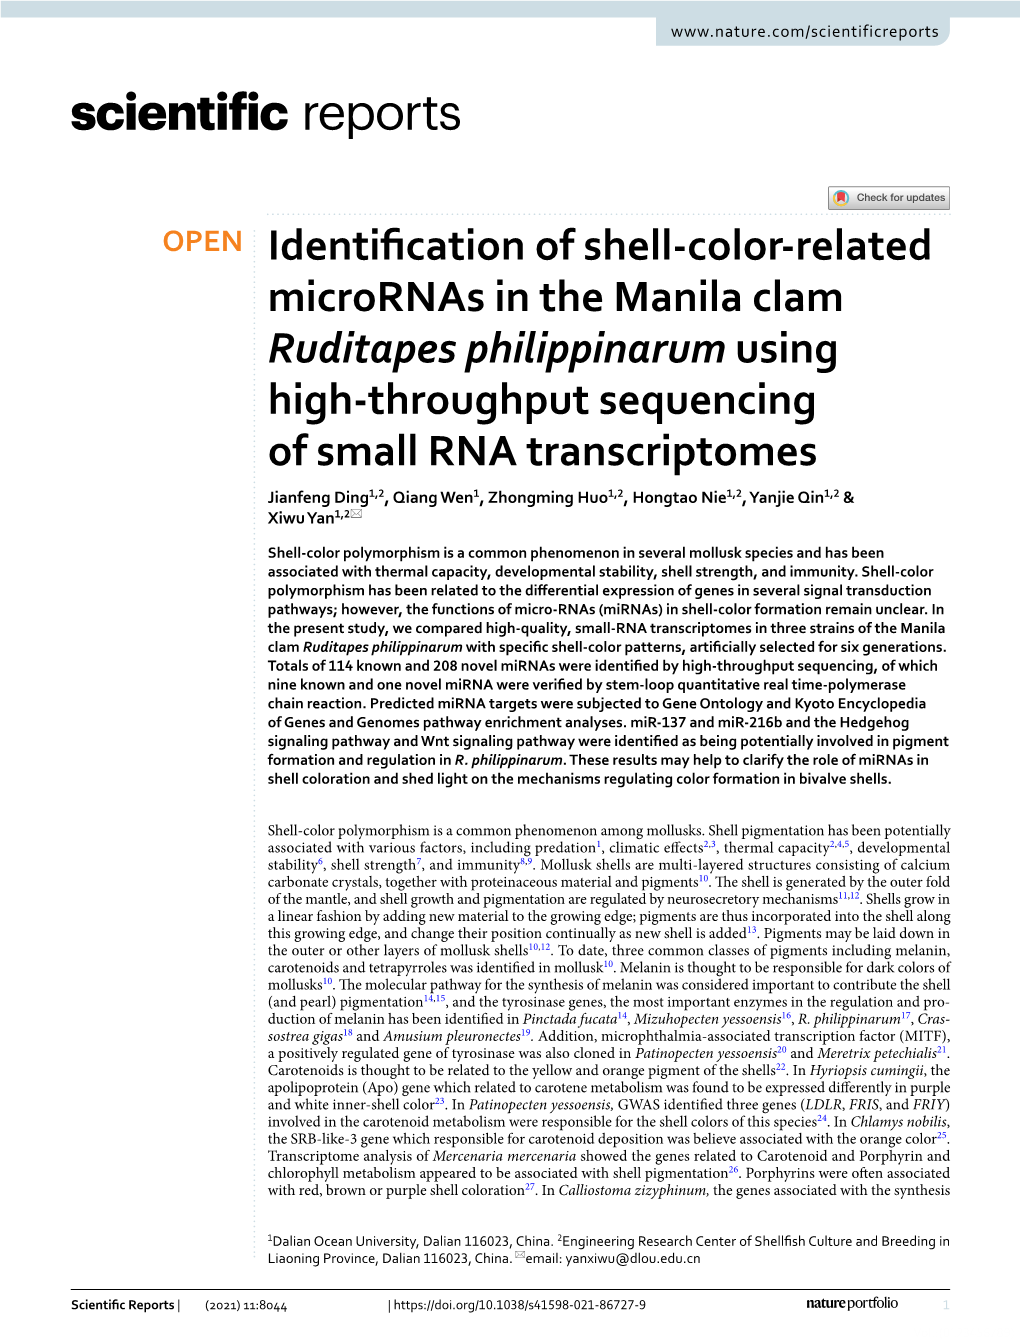 Identification of Shell-Color-Related Micrornas in the Manila Clam